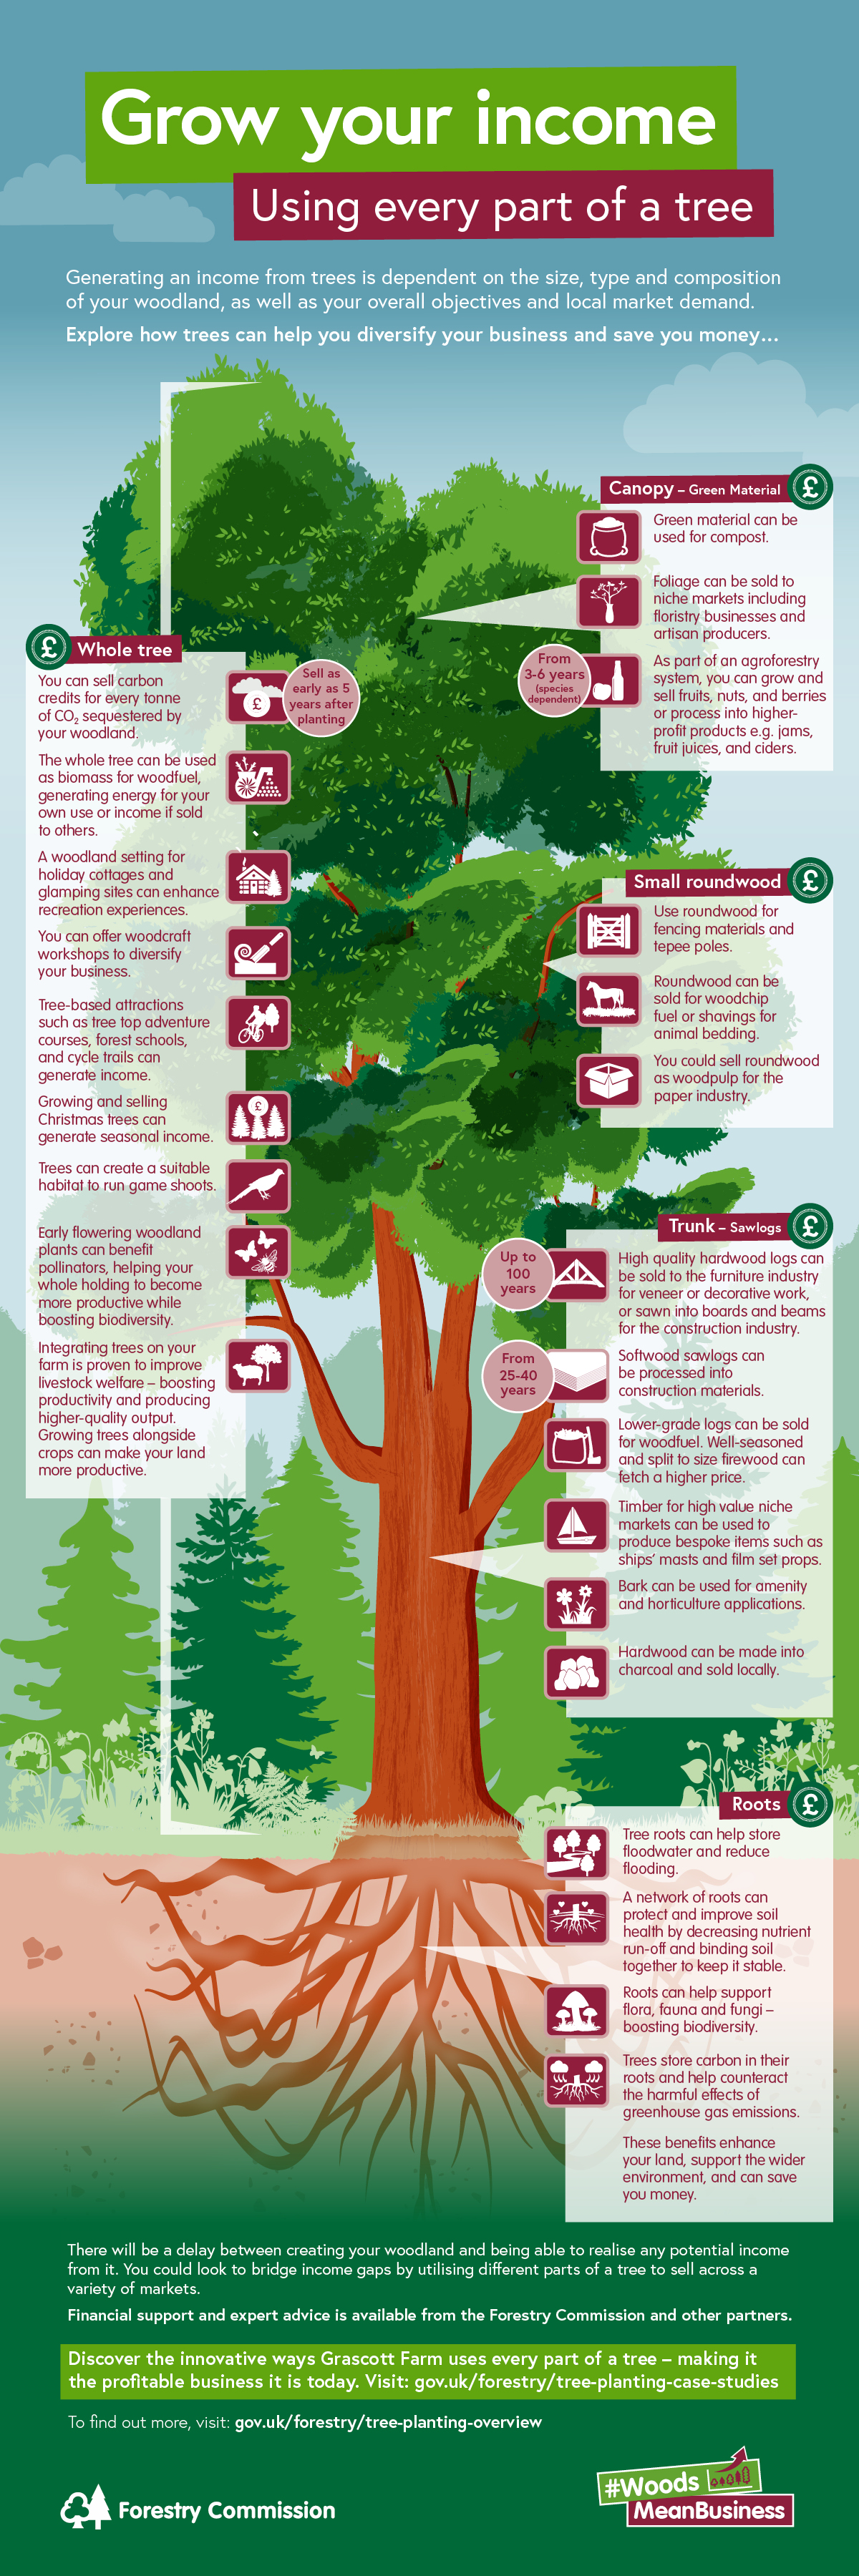 Infographic showing ways to earn income from trees